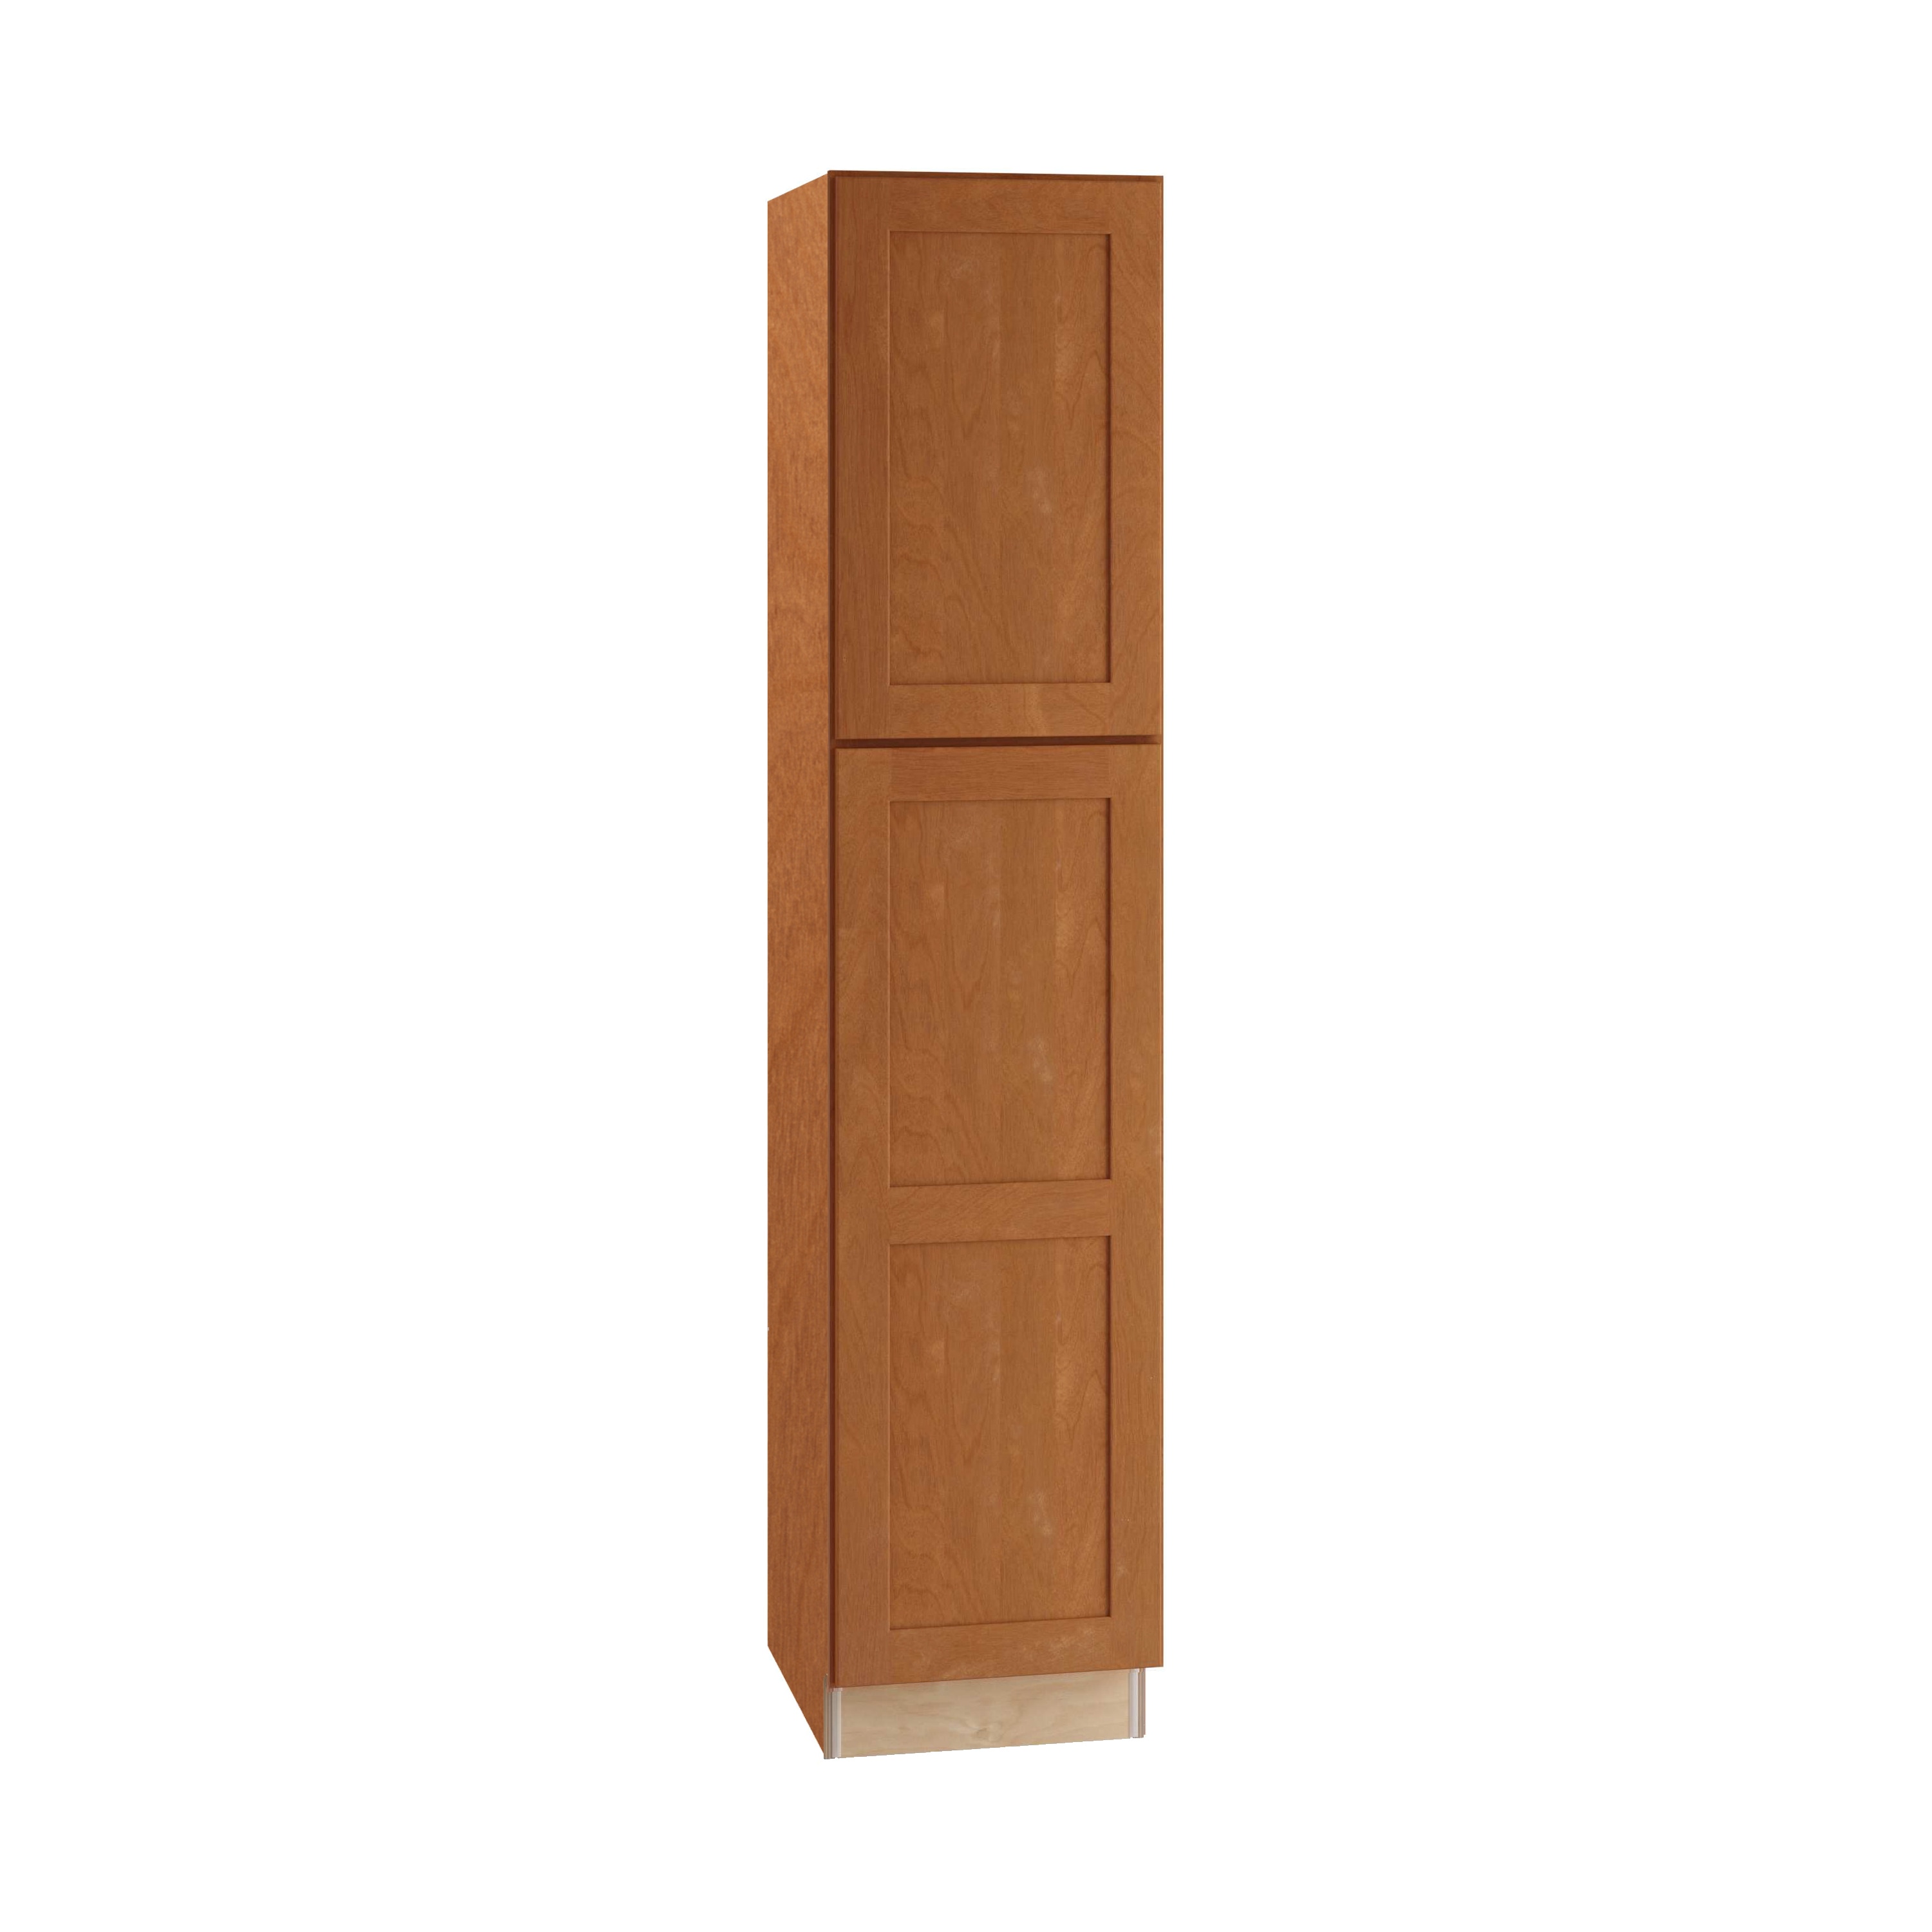 5 Shelf Heston Kitchen Cabinetry at Lowes.com